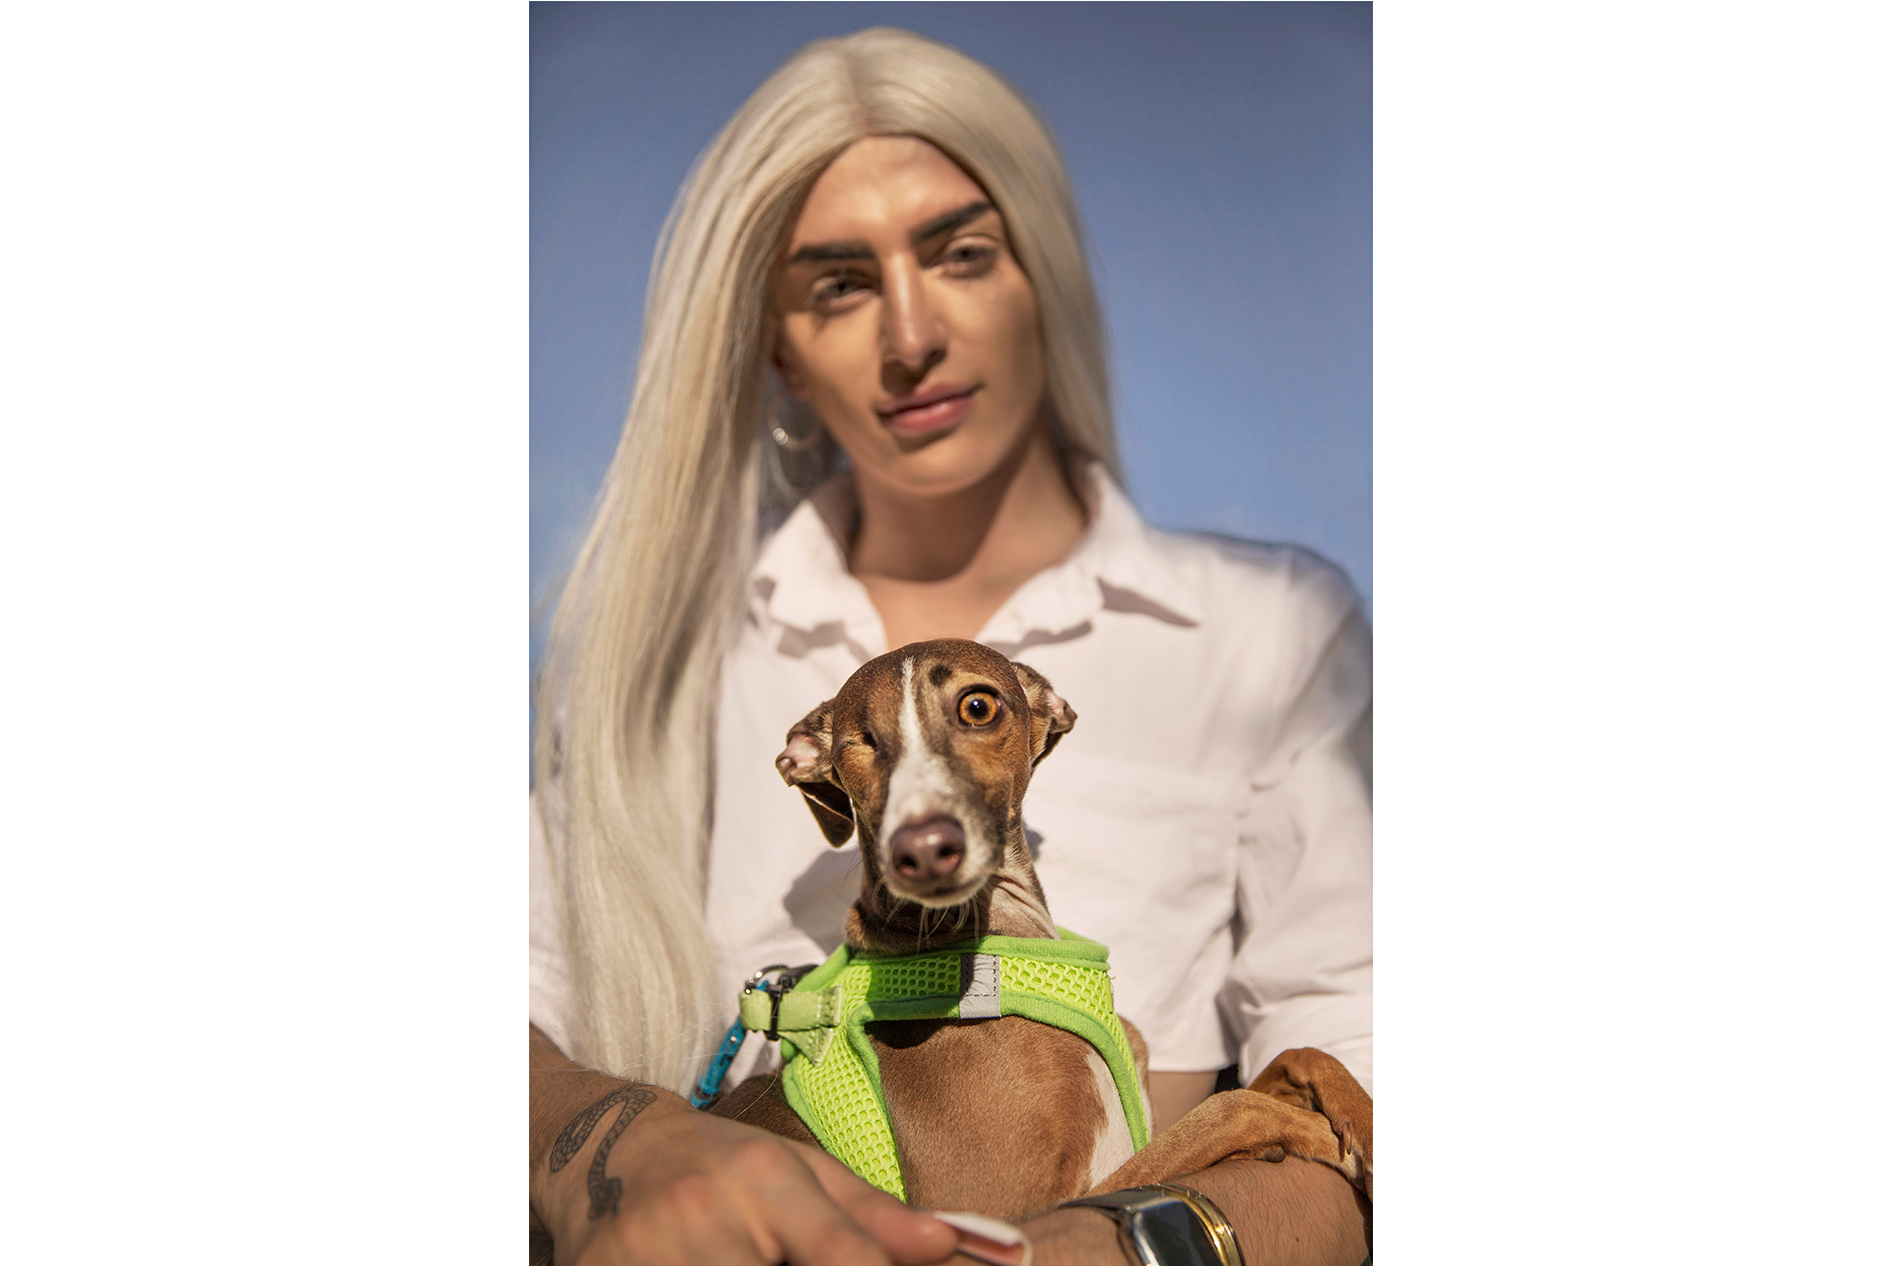 25_Woman-with-one-eyed-dog